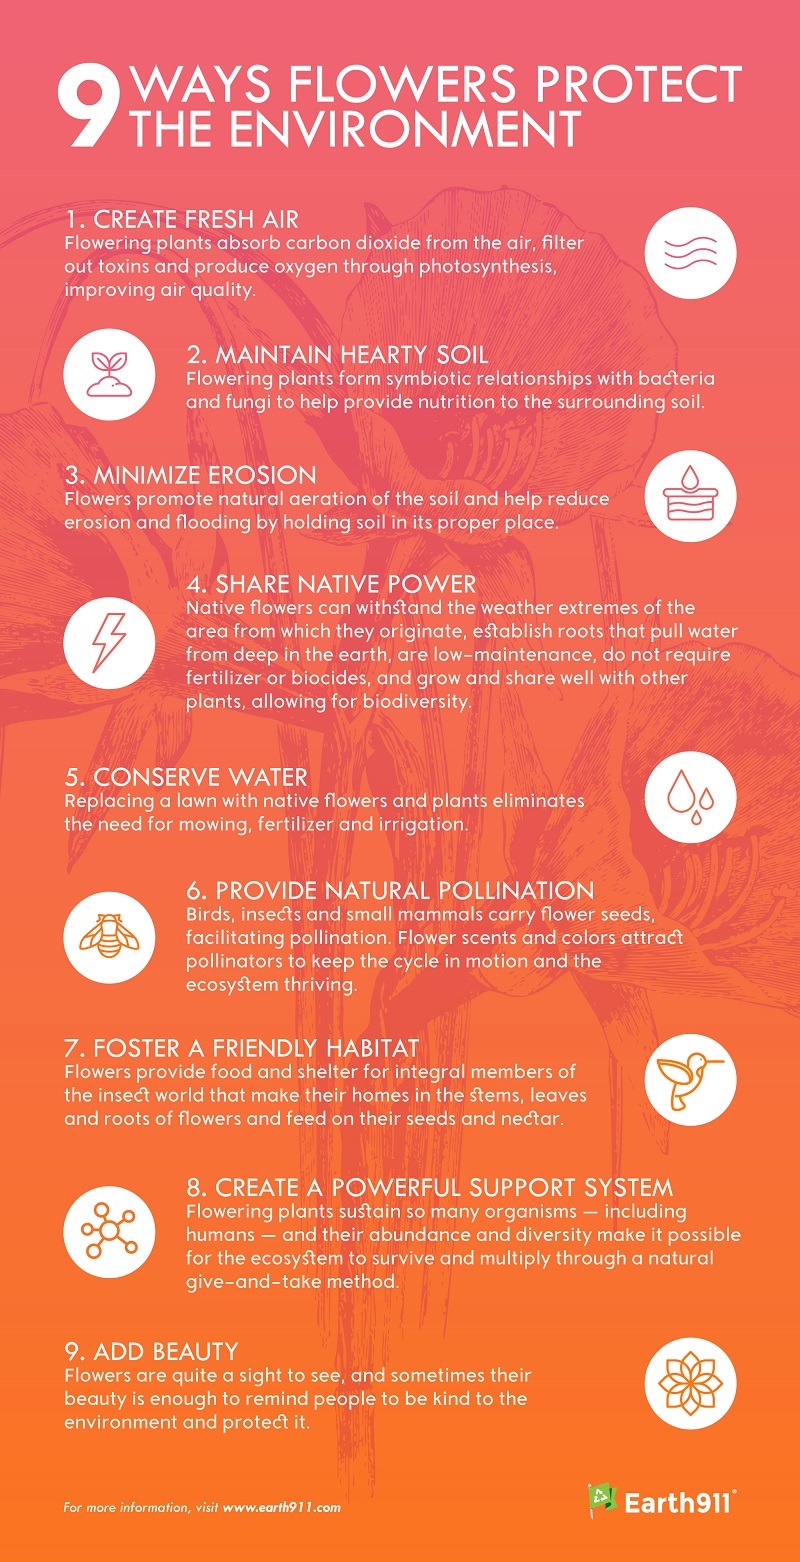 9 ways flowers protect the environment